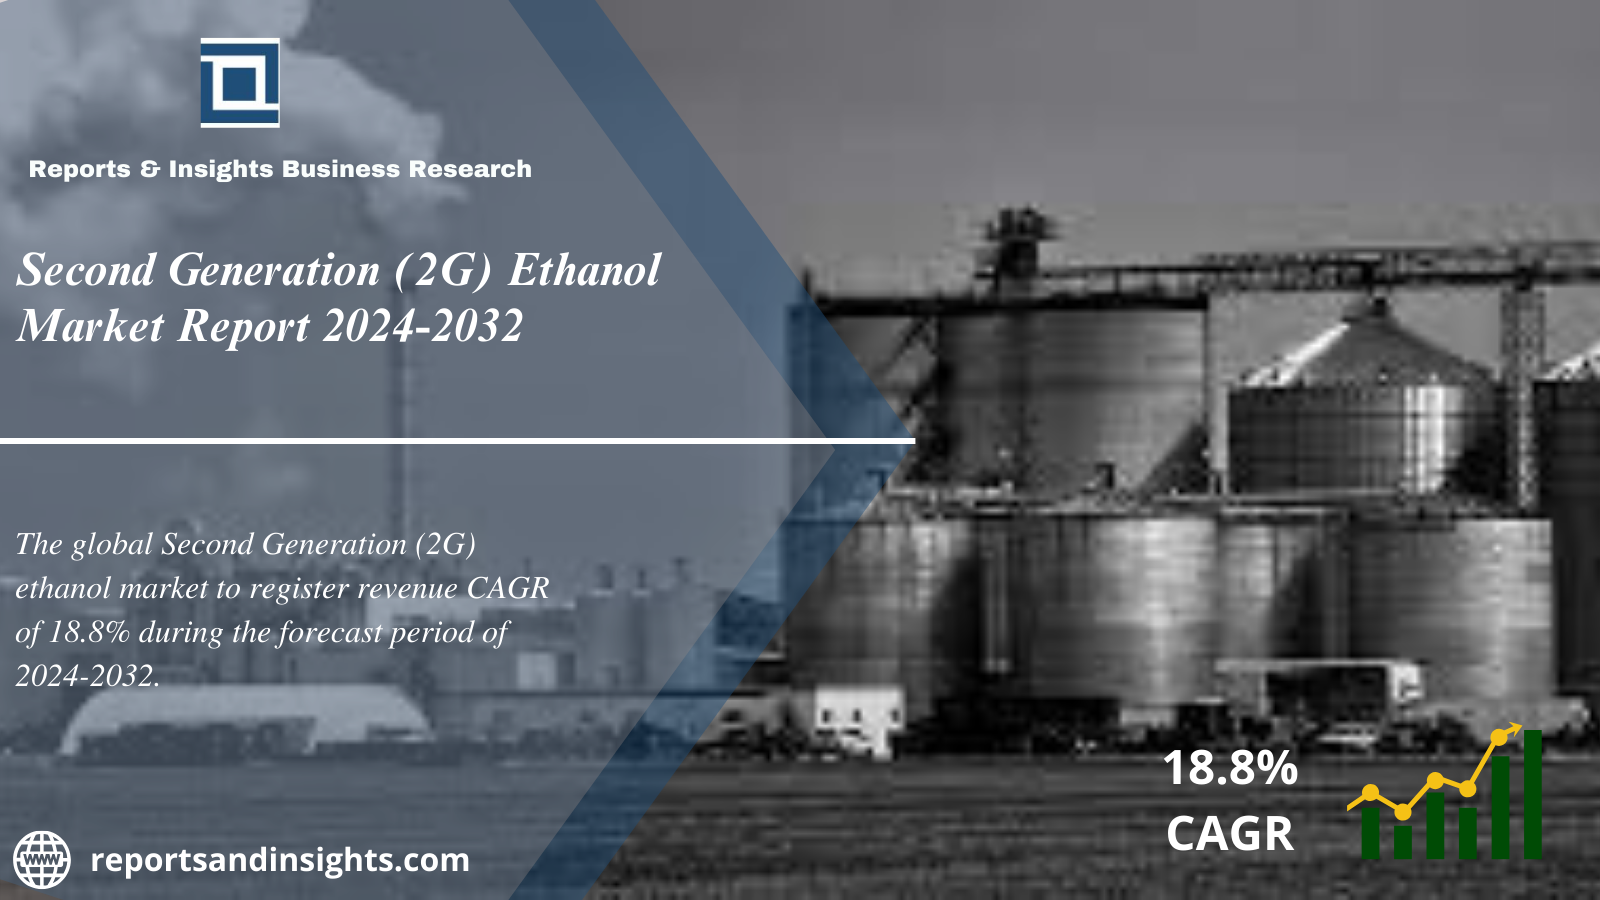 Second Generation (2G) Ethanol Market Report 2024 to 2032: Growth, Size, Share, Trends and Industry Analysis